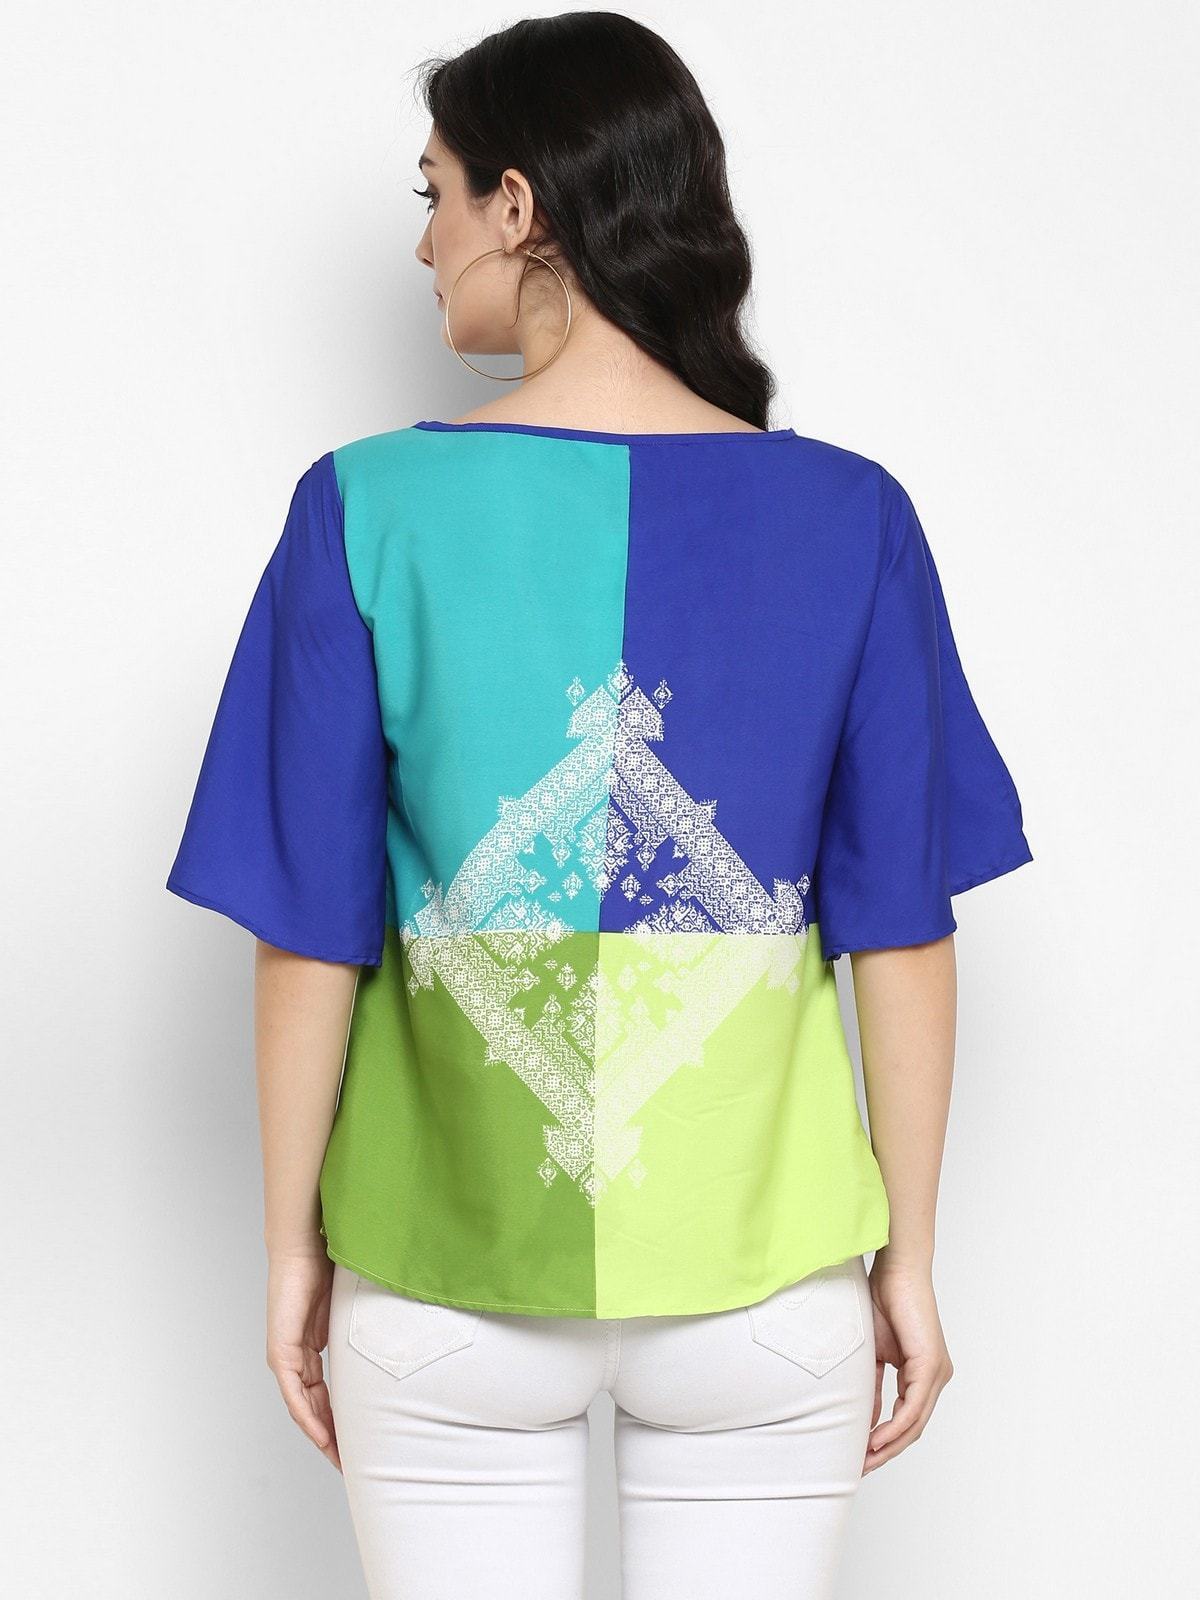 Women's Quirky Placement print Top - Pannkh